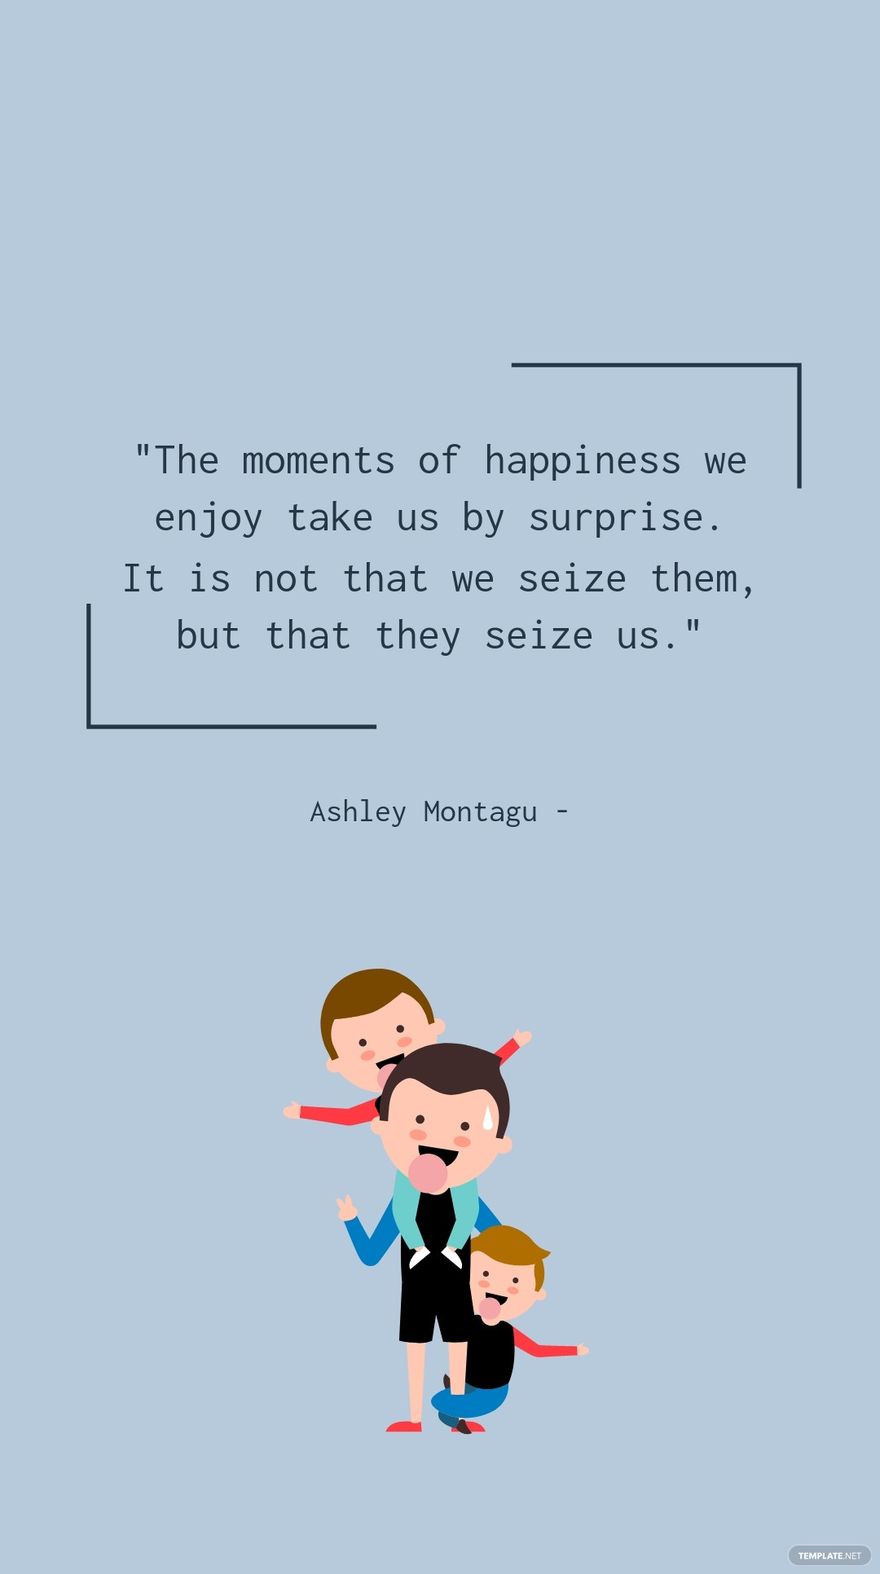 Ashley Montagu - The moments of happiness we enjoy take us by surprise. It is not that we seize them, but that they seize us. in JPG